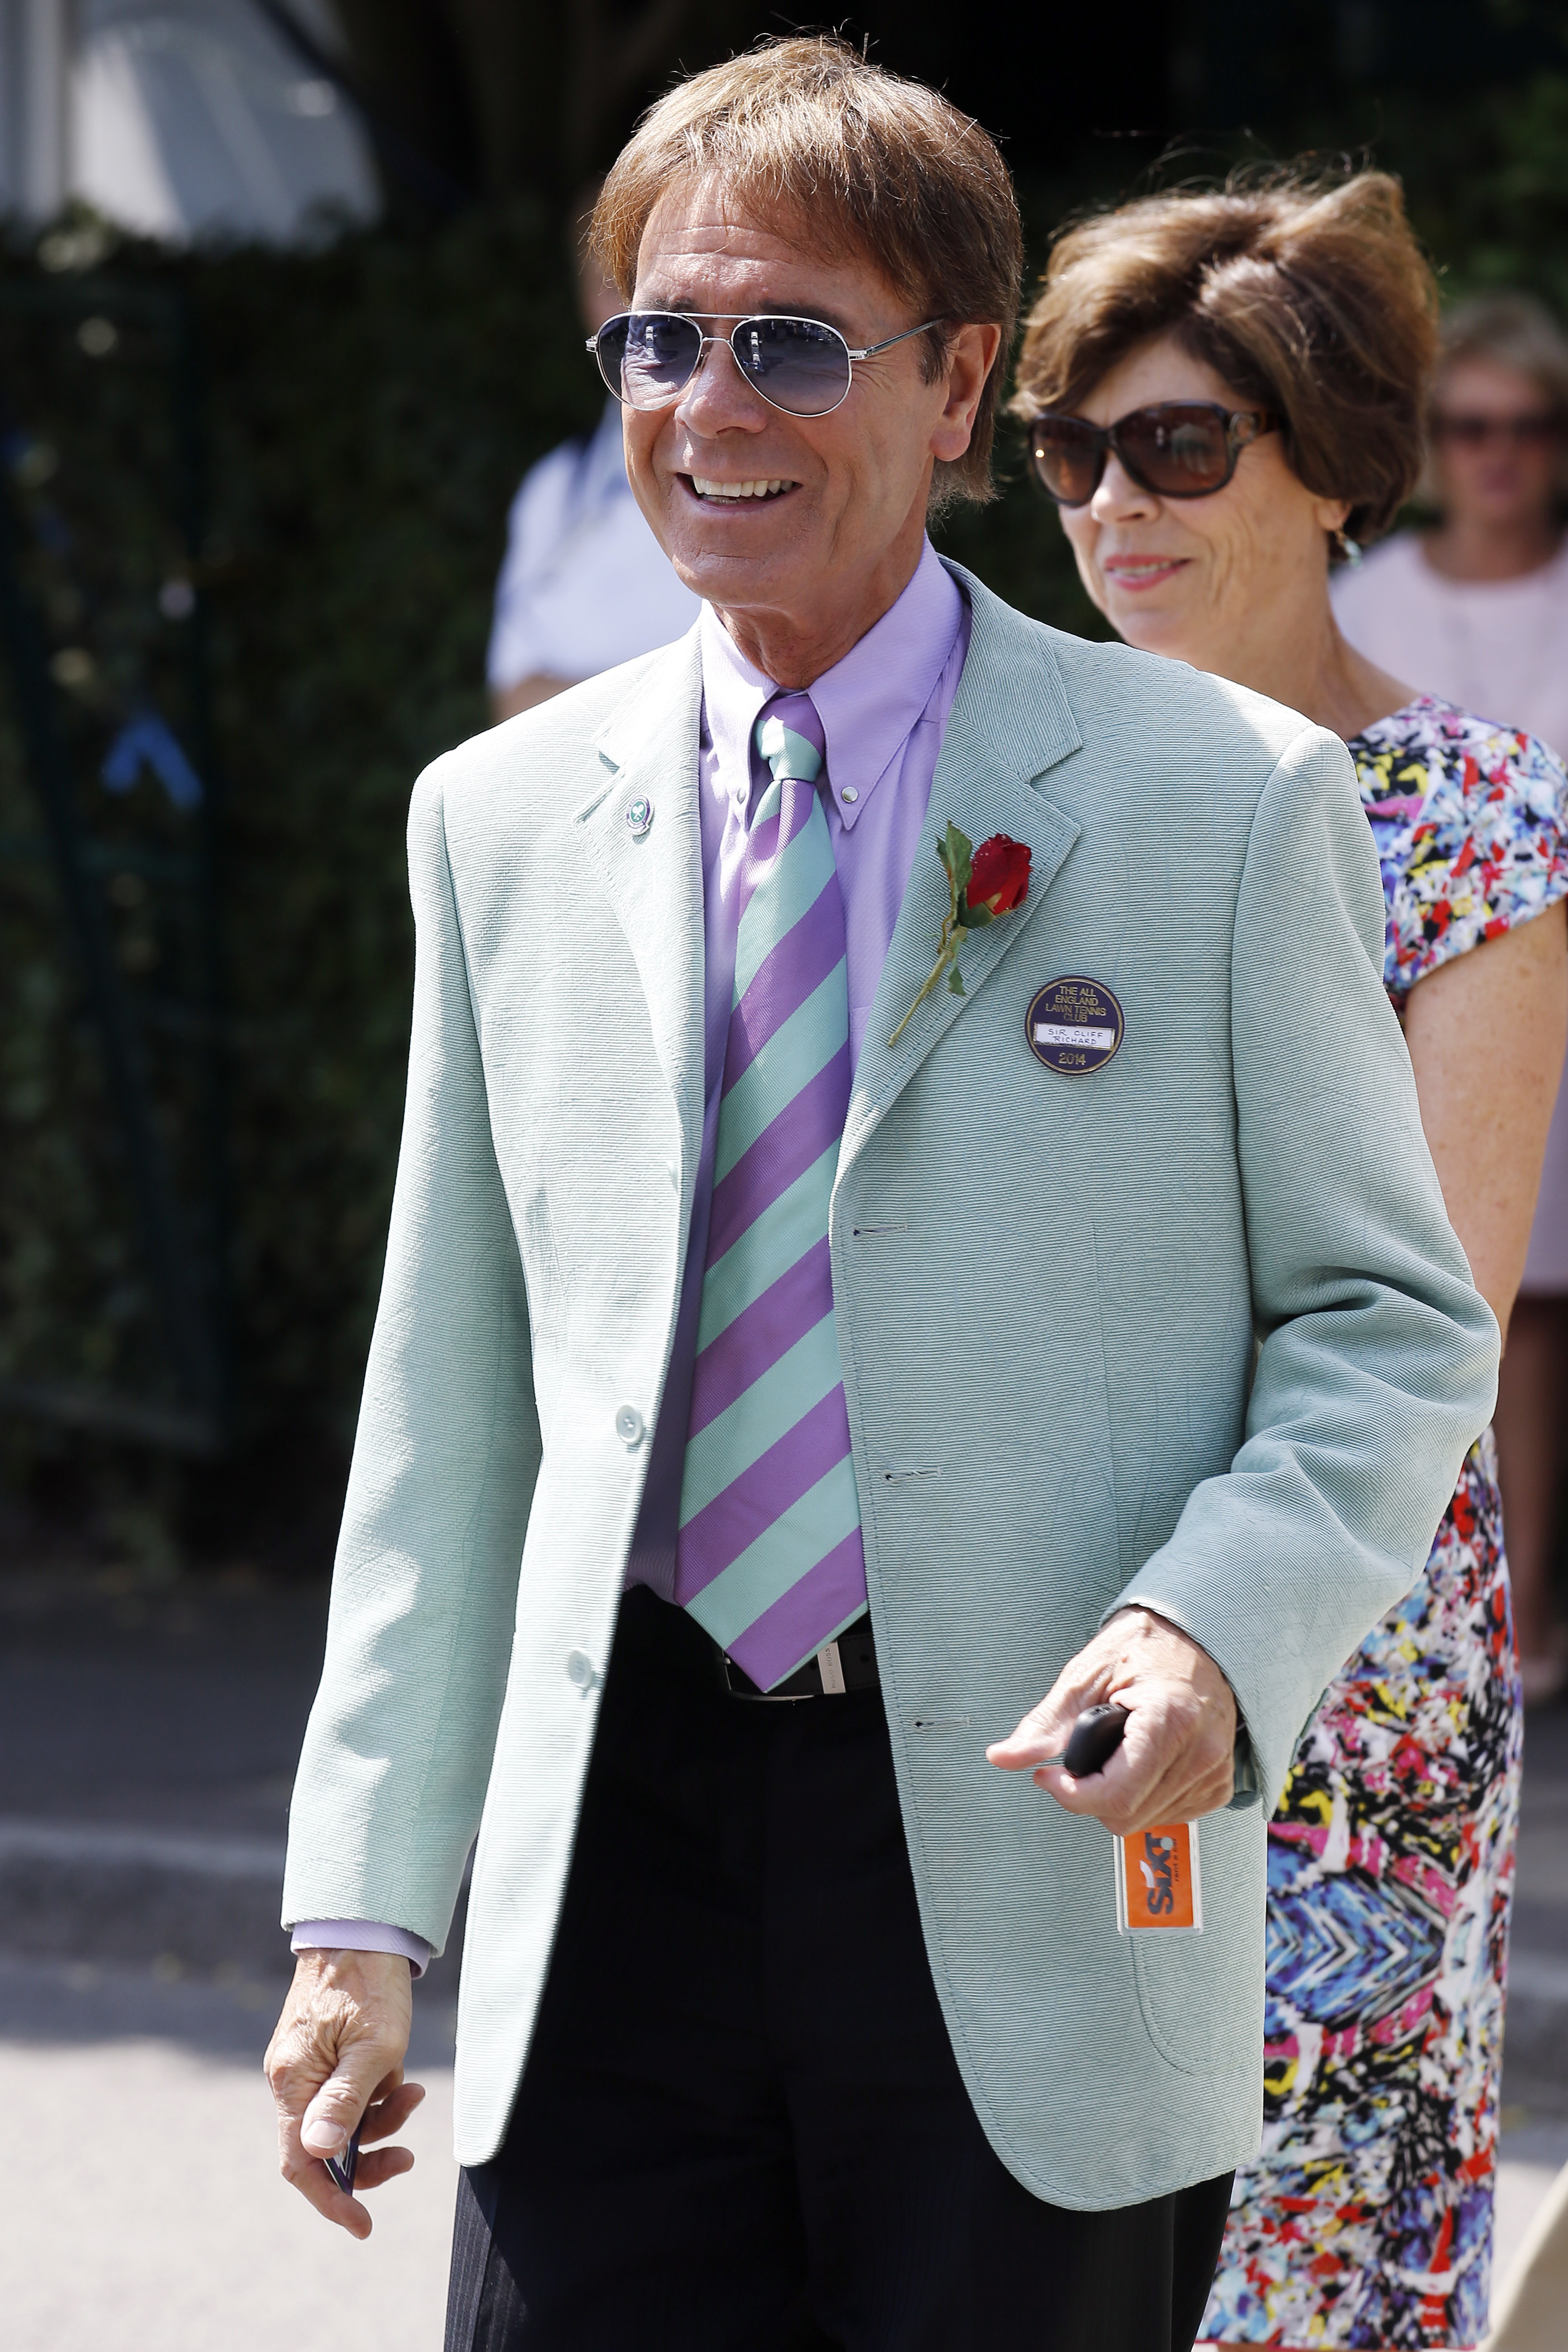 Sir Cliff Richard seen arriving at Wimbledon on July 04, 2014 in London.